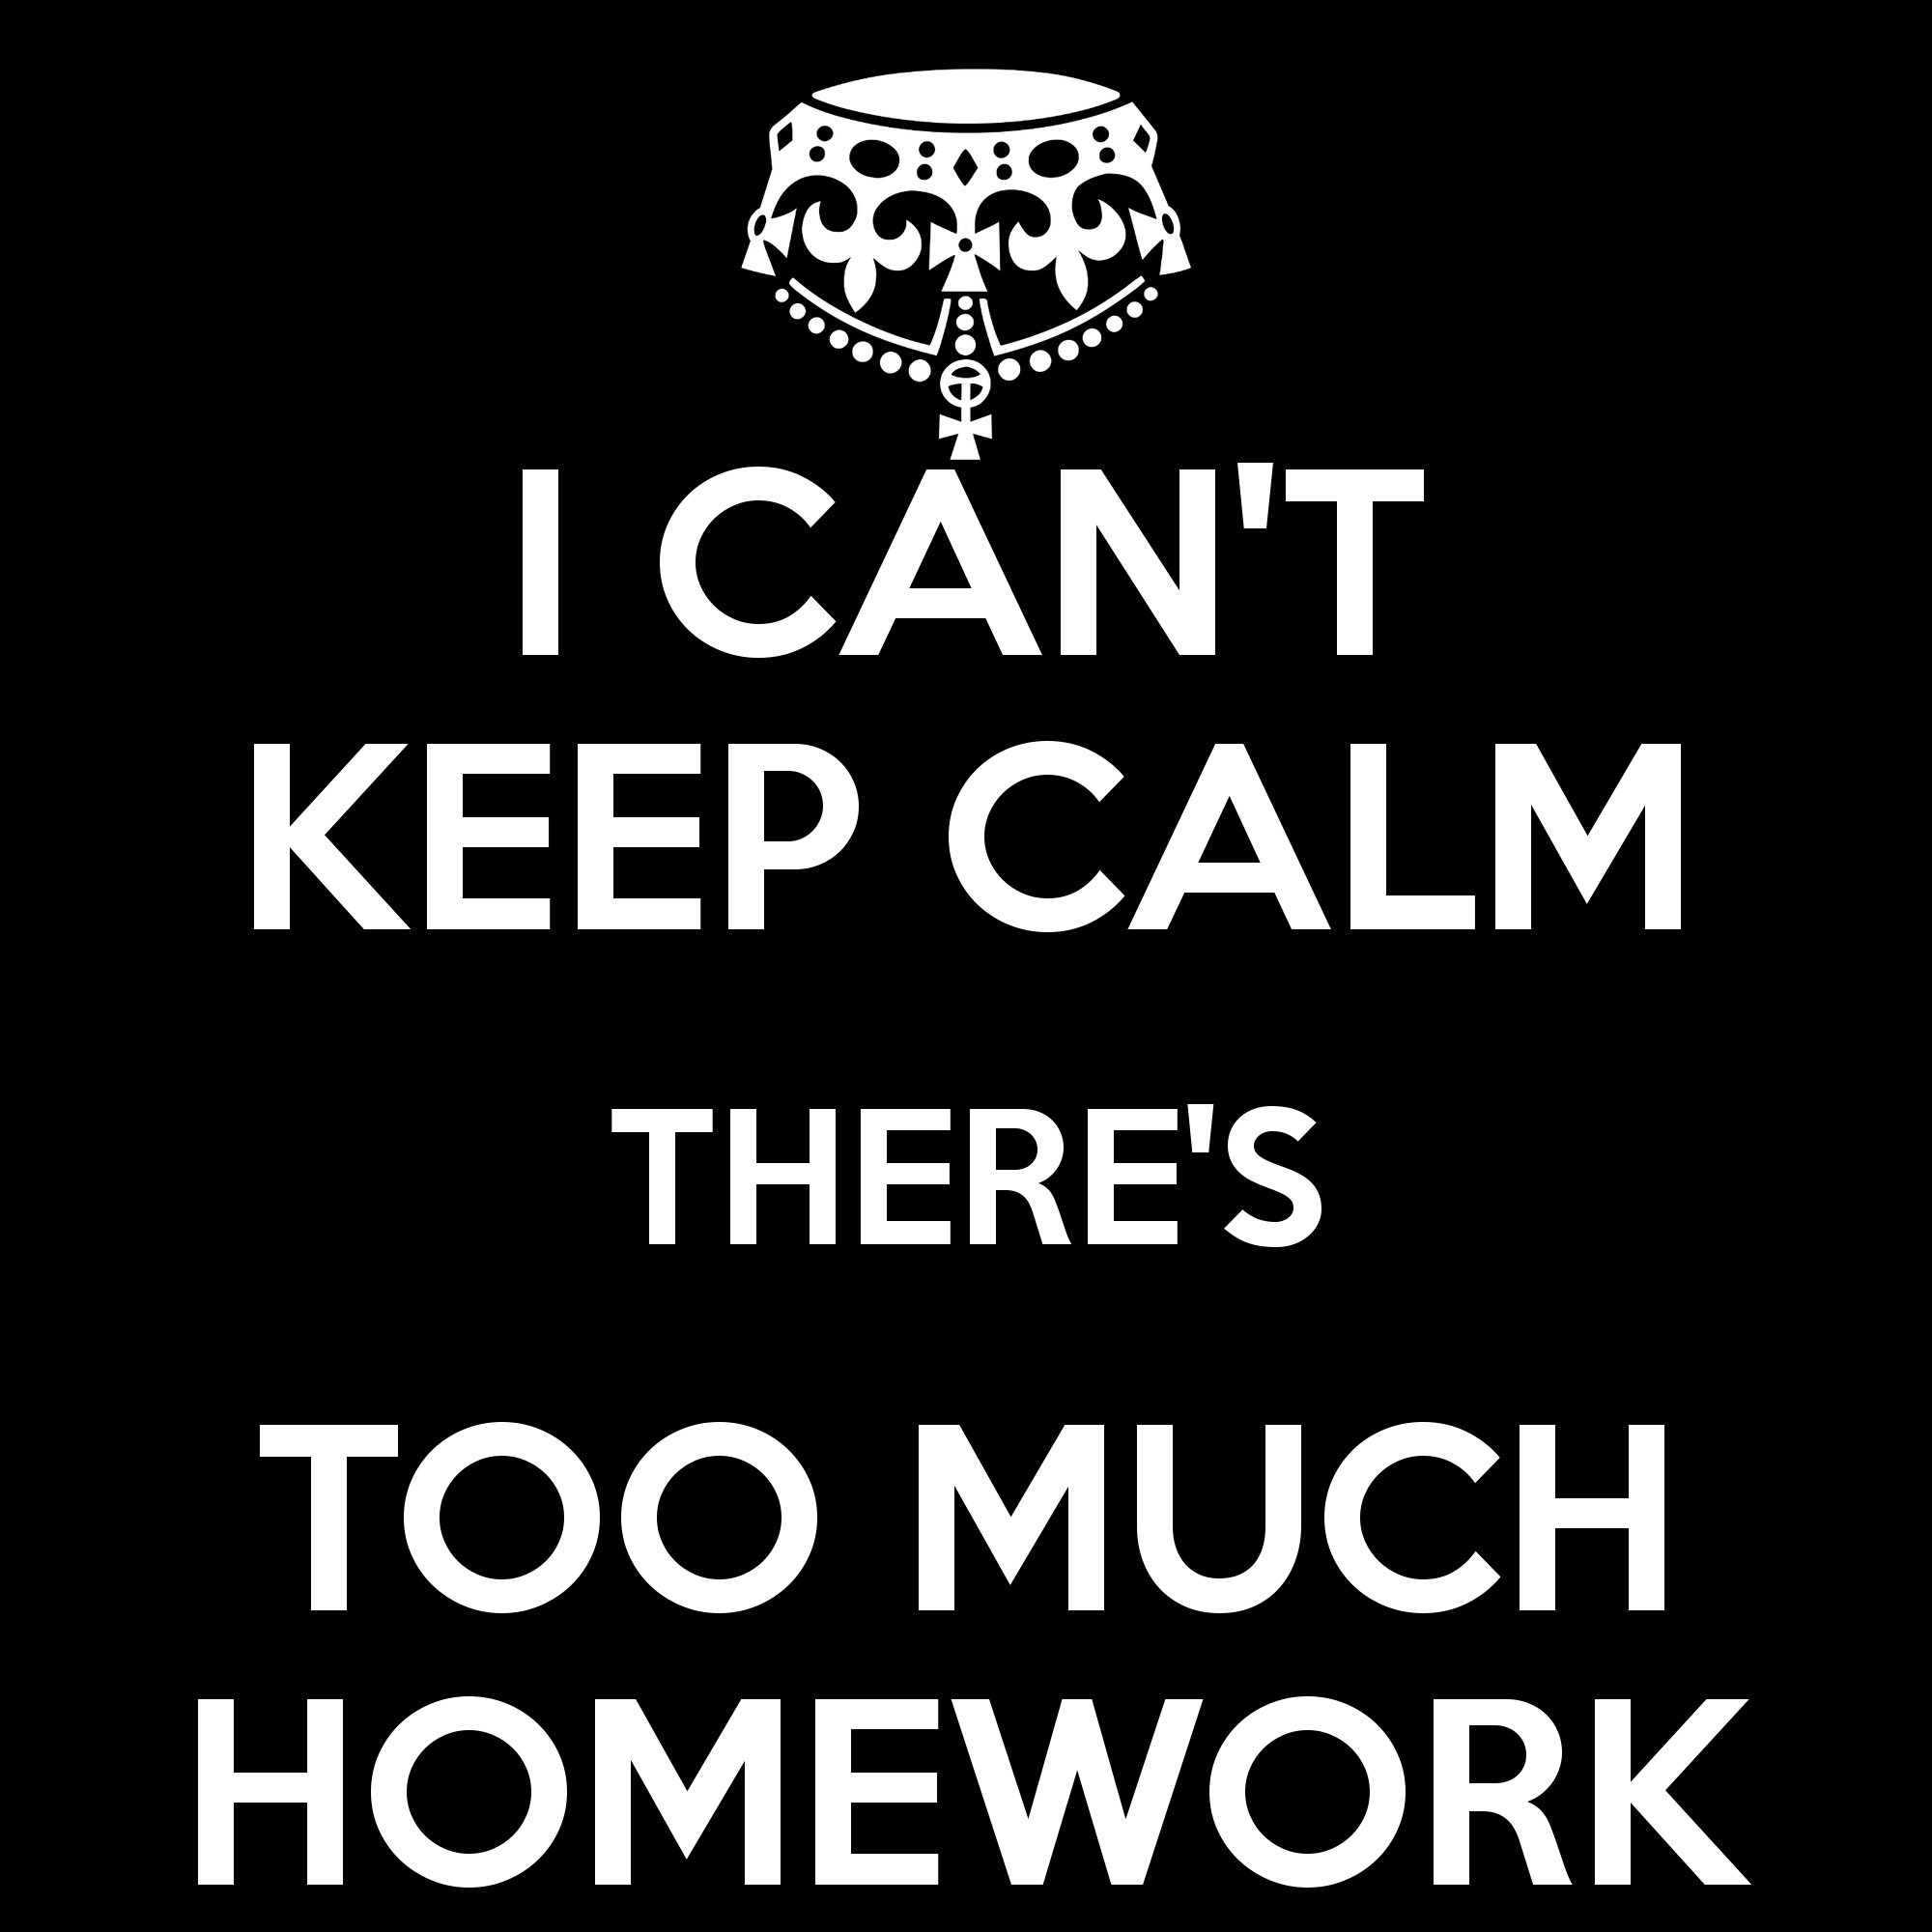 You can do your homework. Keep Calm and do your homework. Keep Calm. Cant keep Calm it. Much homework.